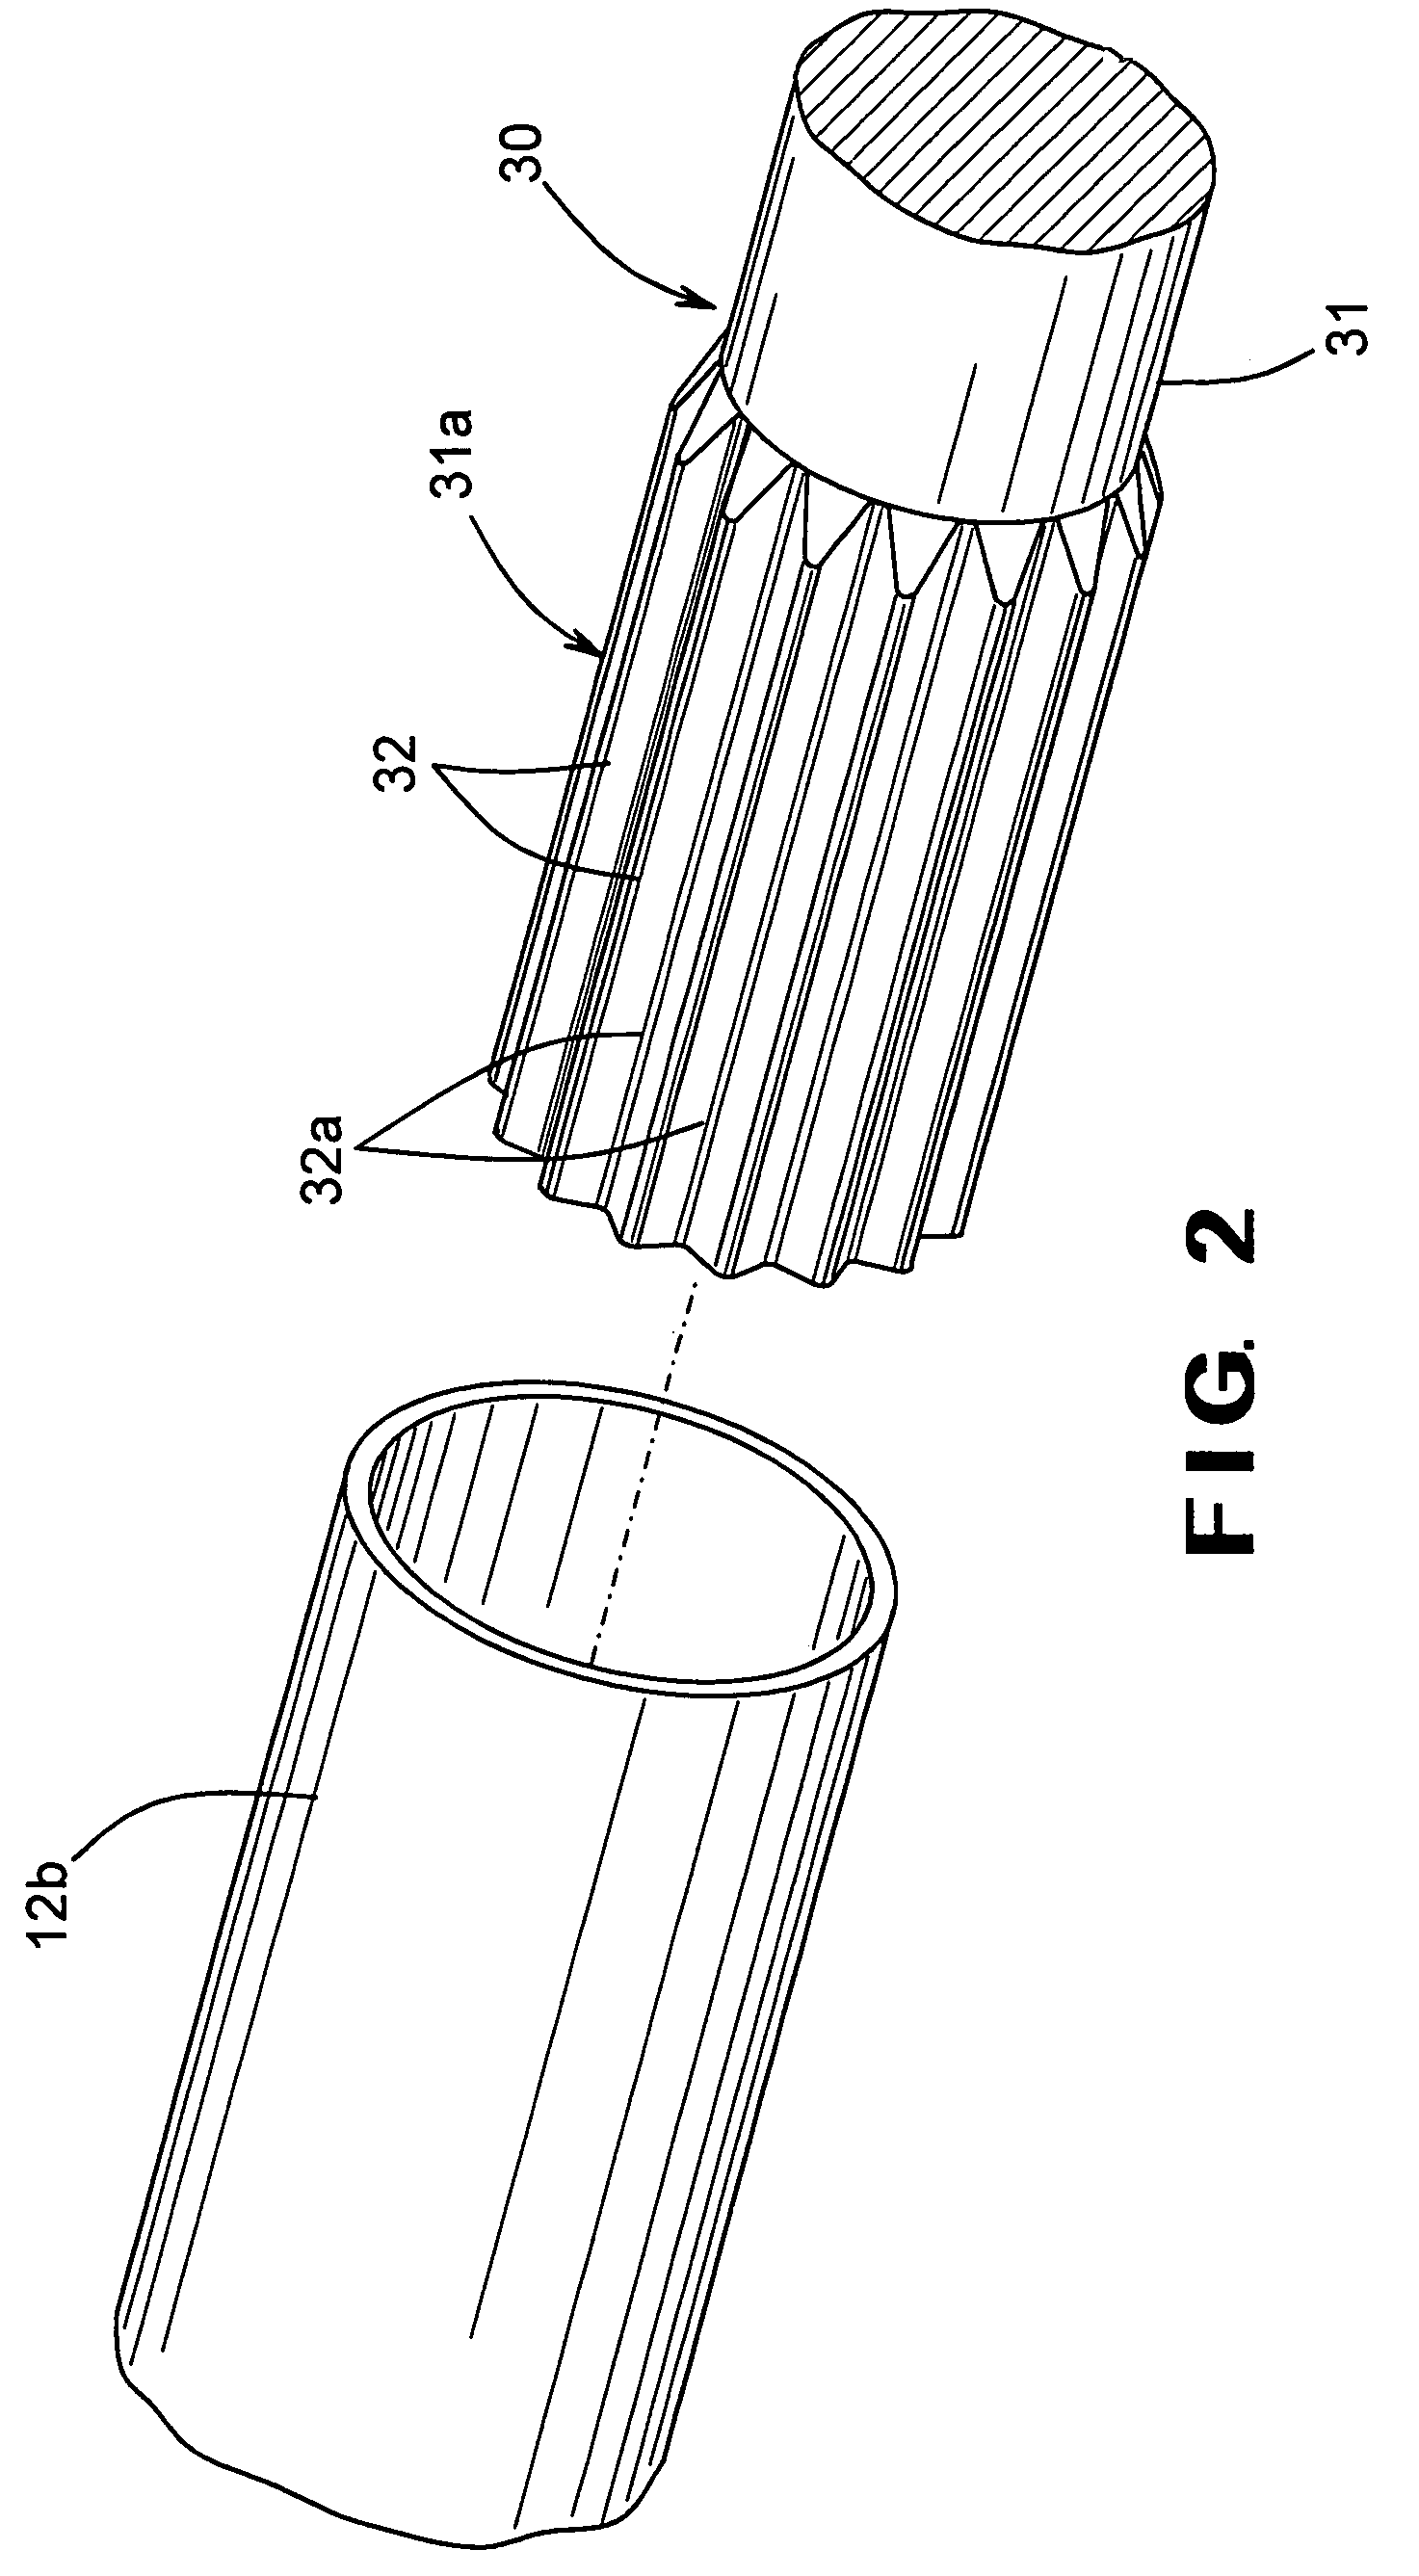 Method of forming a slip joint